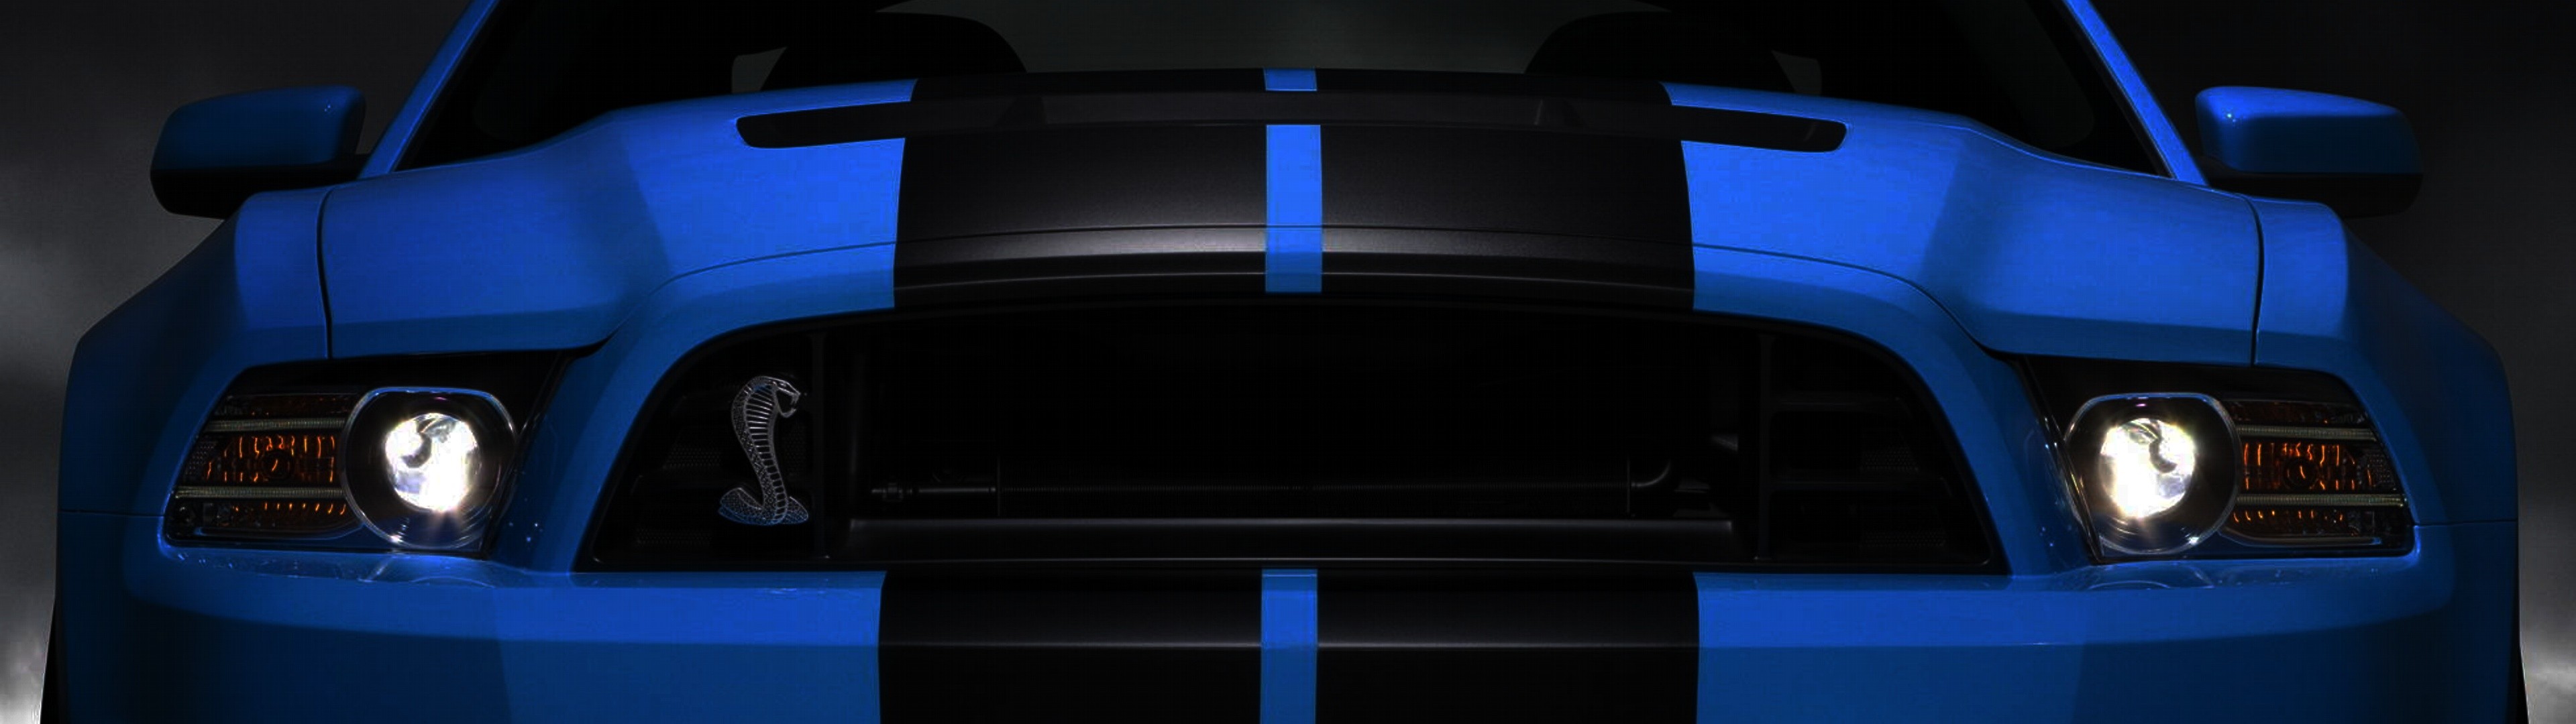 General 3840x1080 multiple display car Ford vehicle blue cars Ford Mustang Shelby Shelby Ford Mustang S-197 II Ford Mustang racing stripes muscle cars American cars